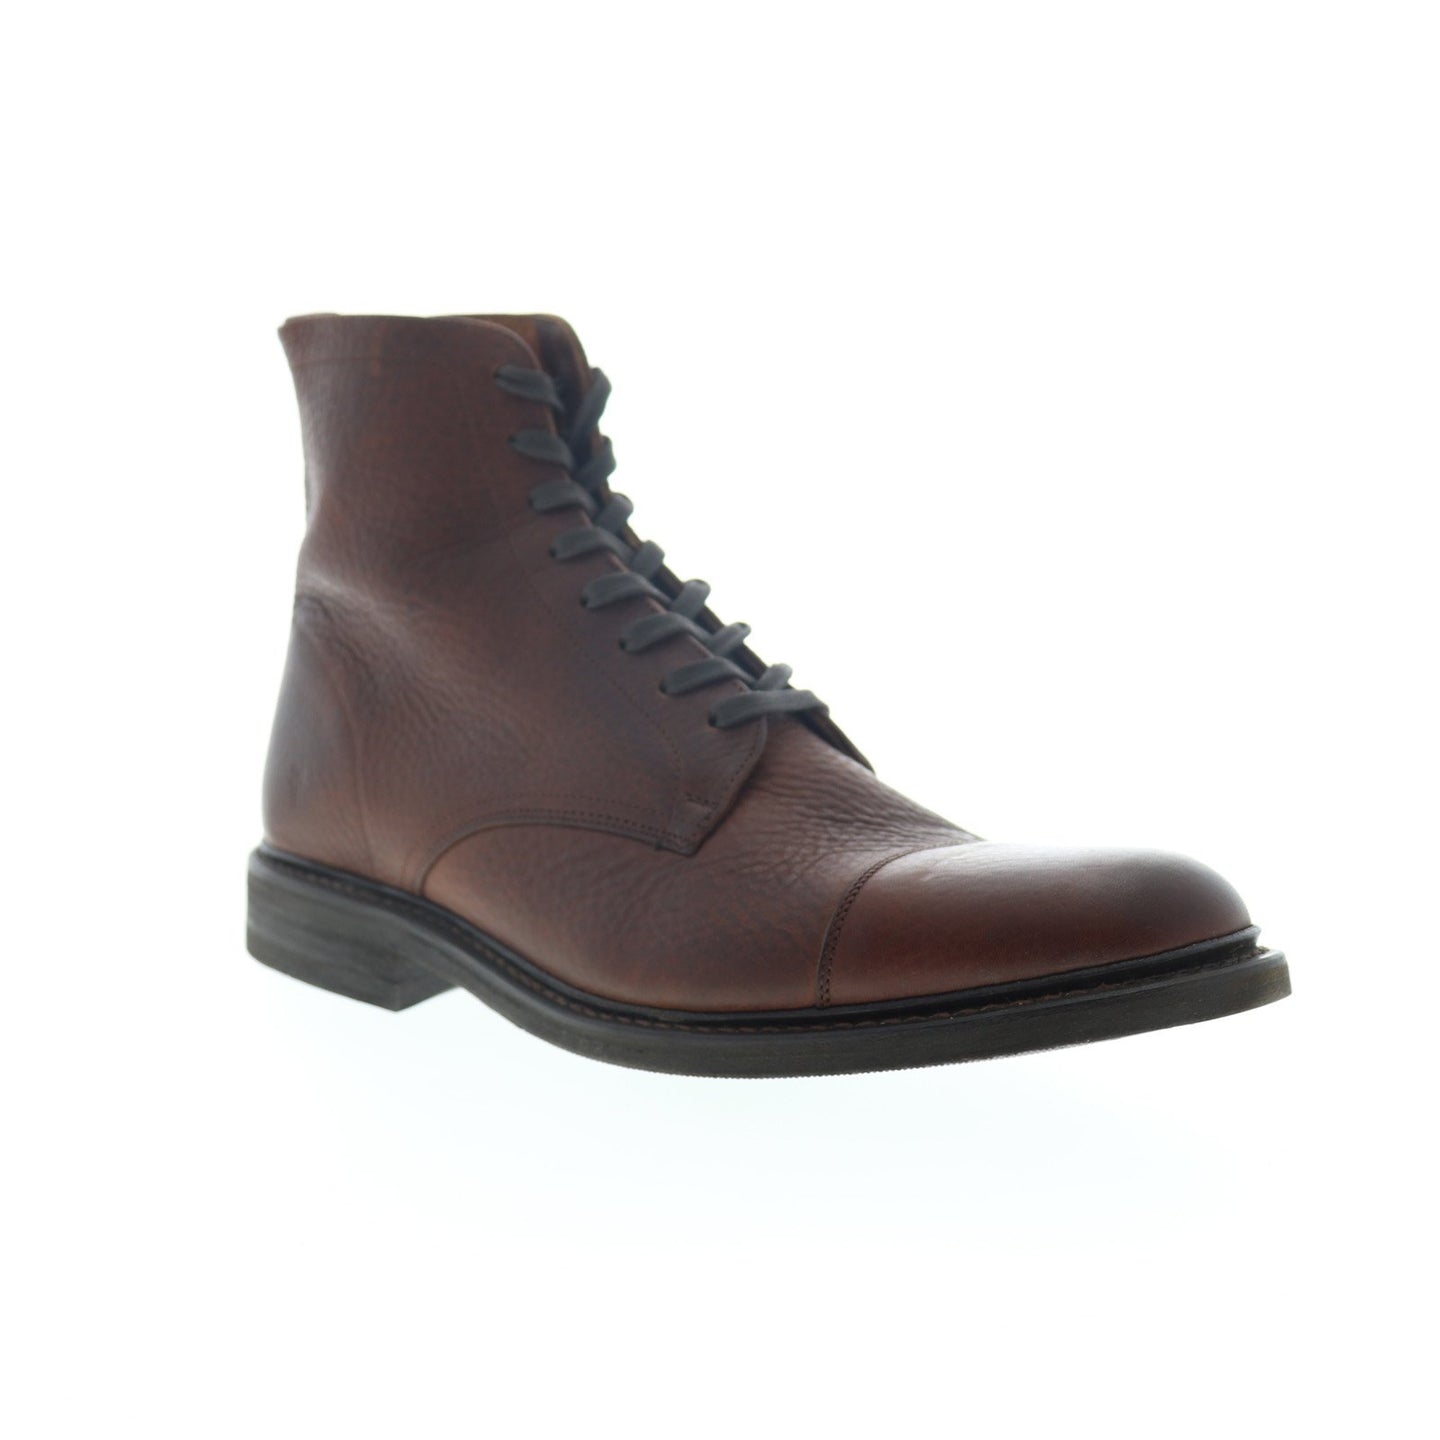 Frye Seth Cap Toe 80081 Mens Brown Leather Lace Up Casual Dress Boots ...